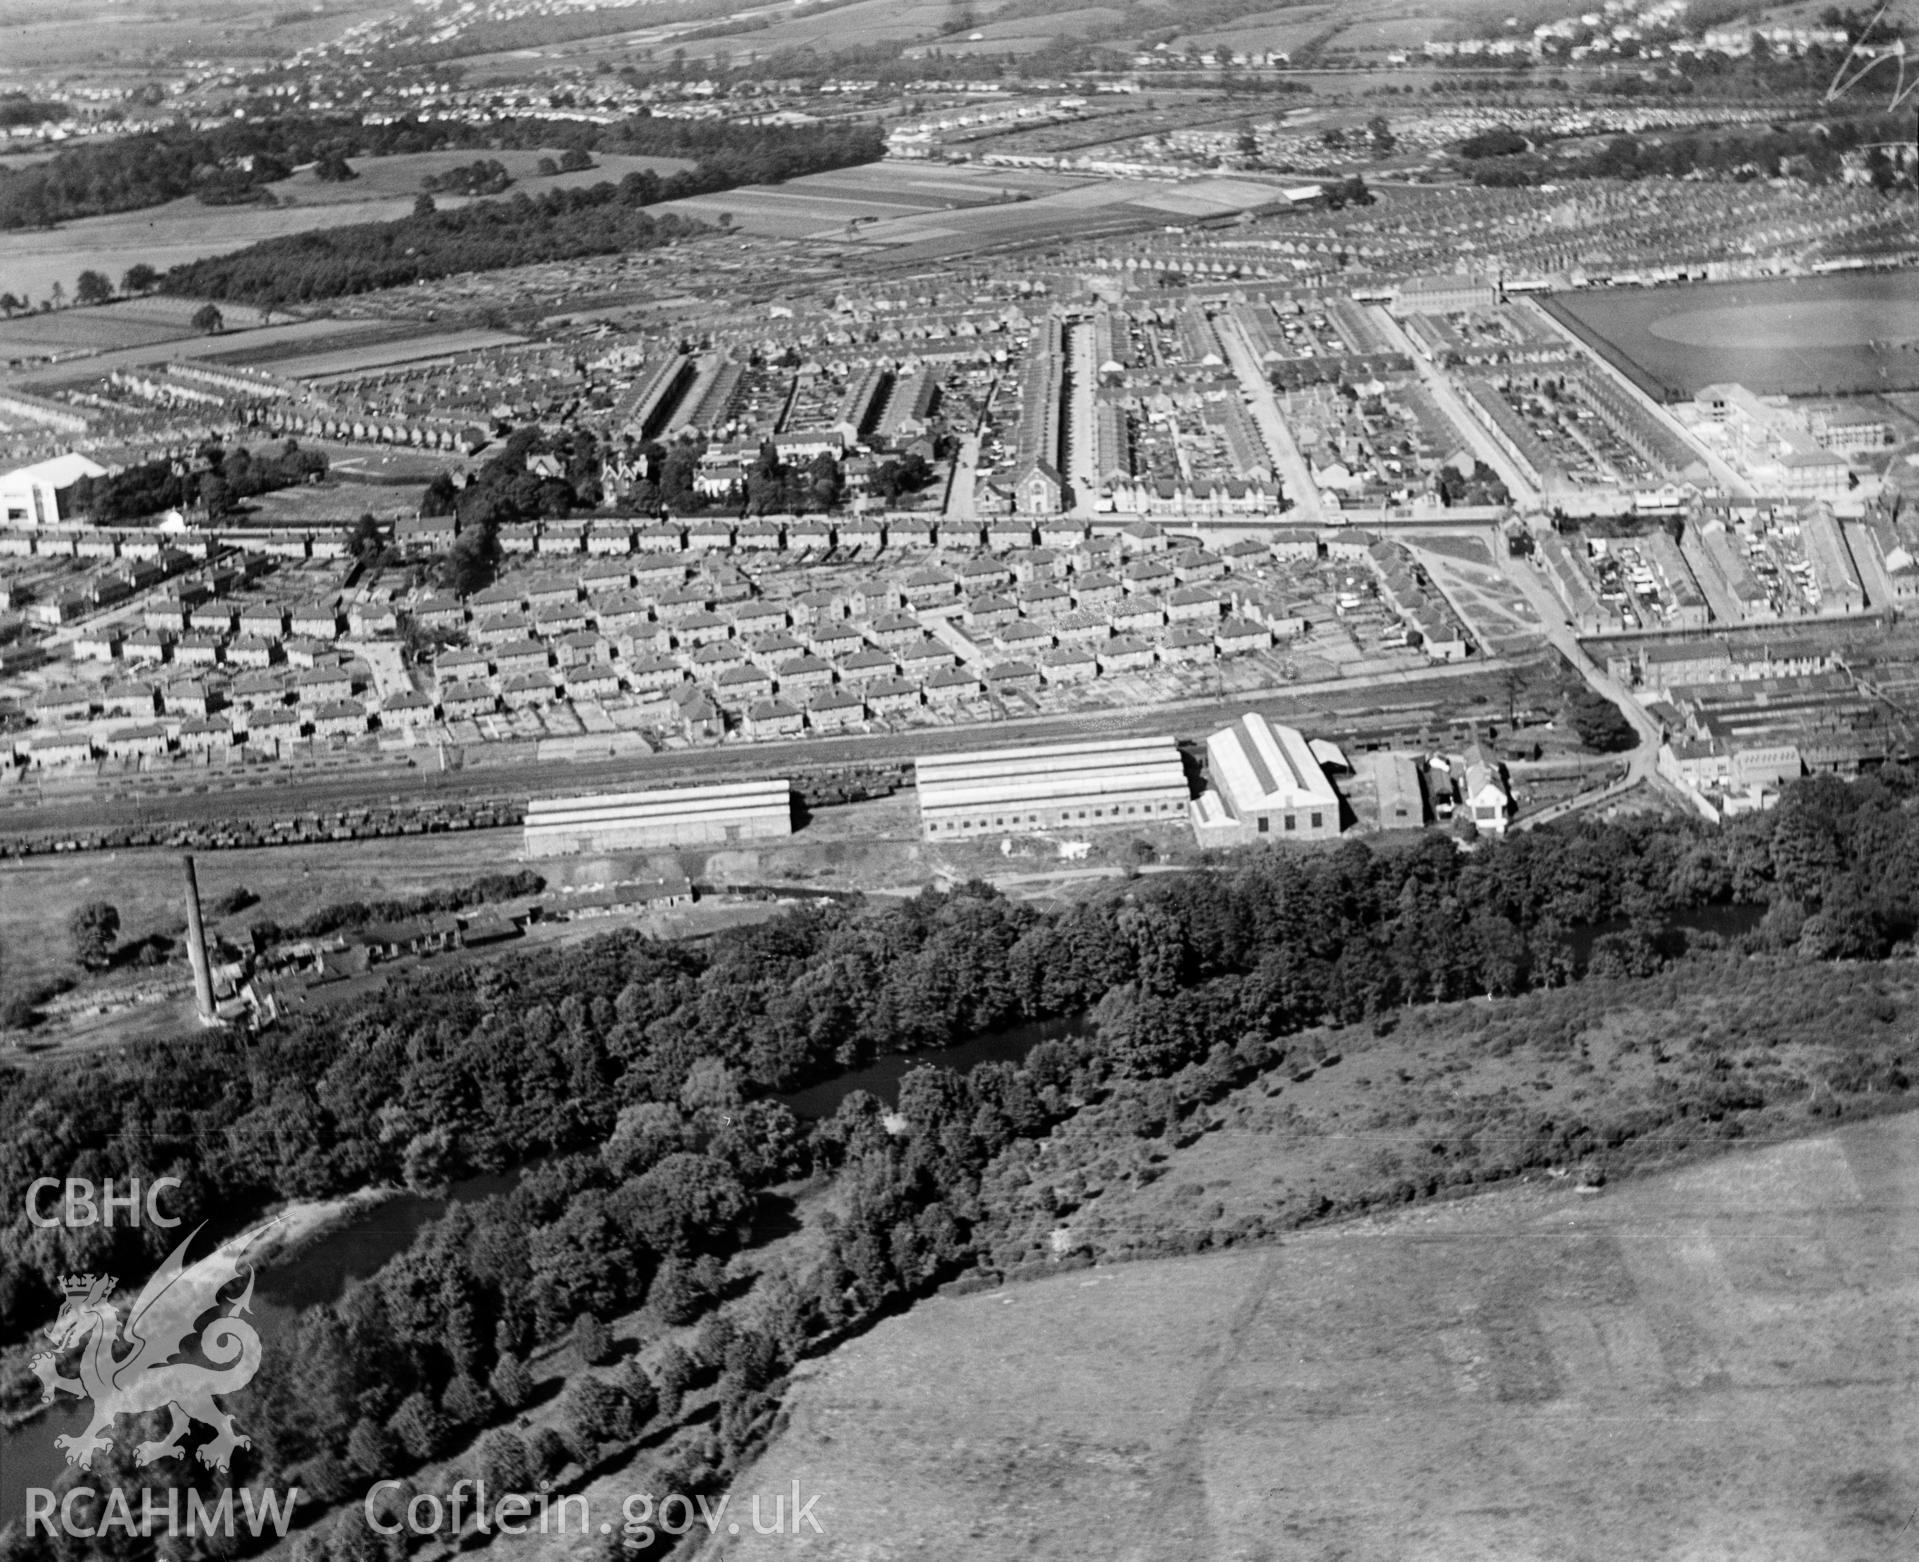 View of the Patent Fuel Works, Soap Works and  Wagon Works, Gabalfa, Cardiff, oblique aerial view. 5?x4? black and white glass plate negative.